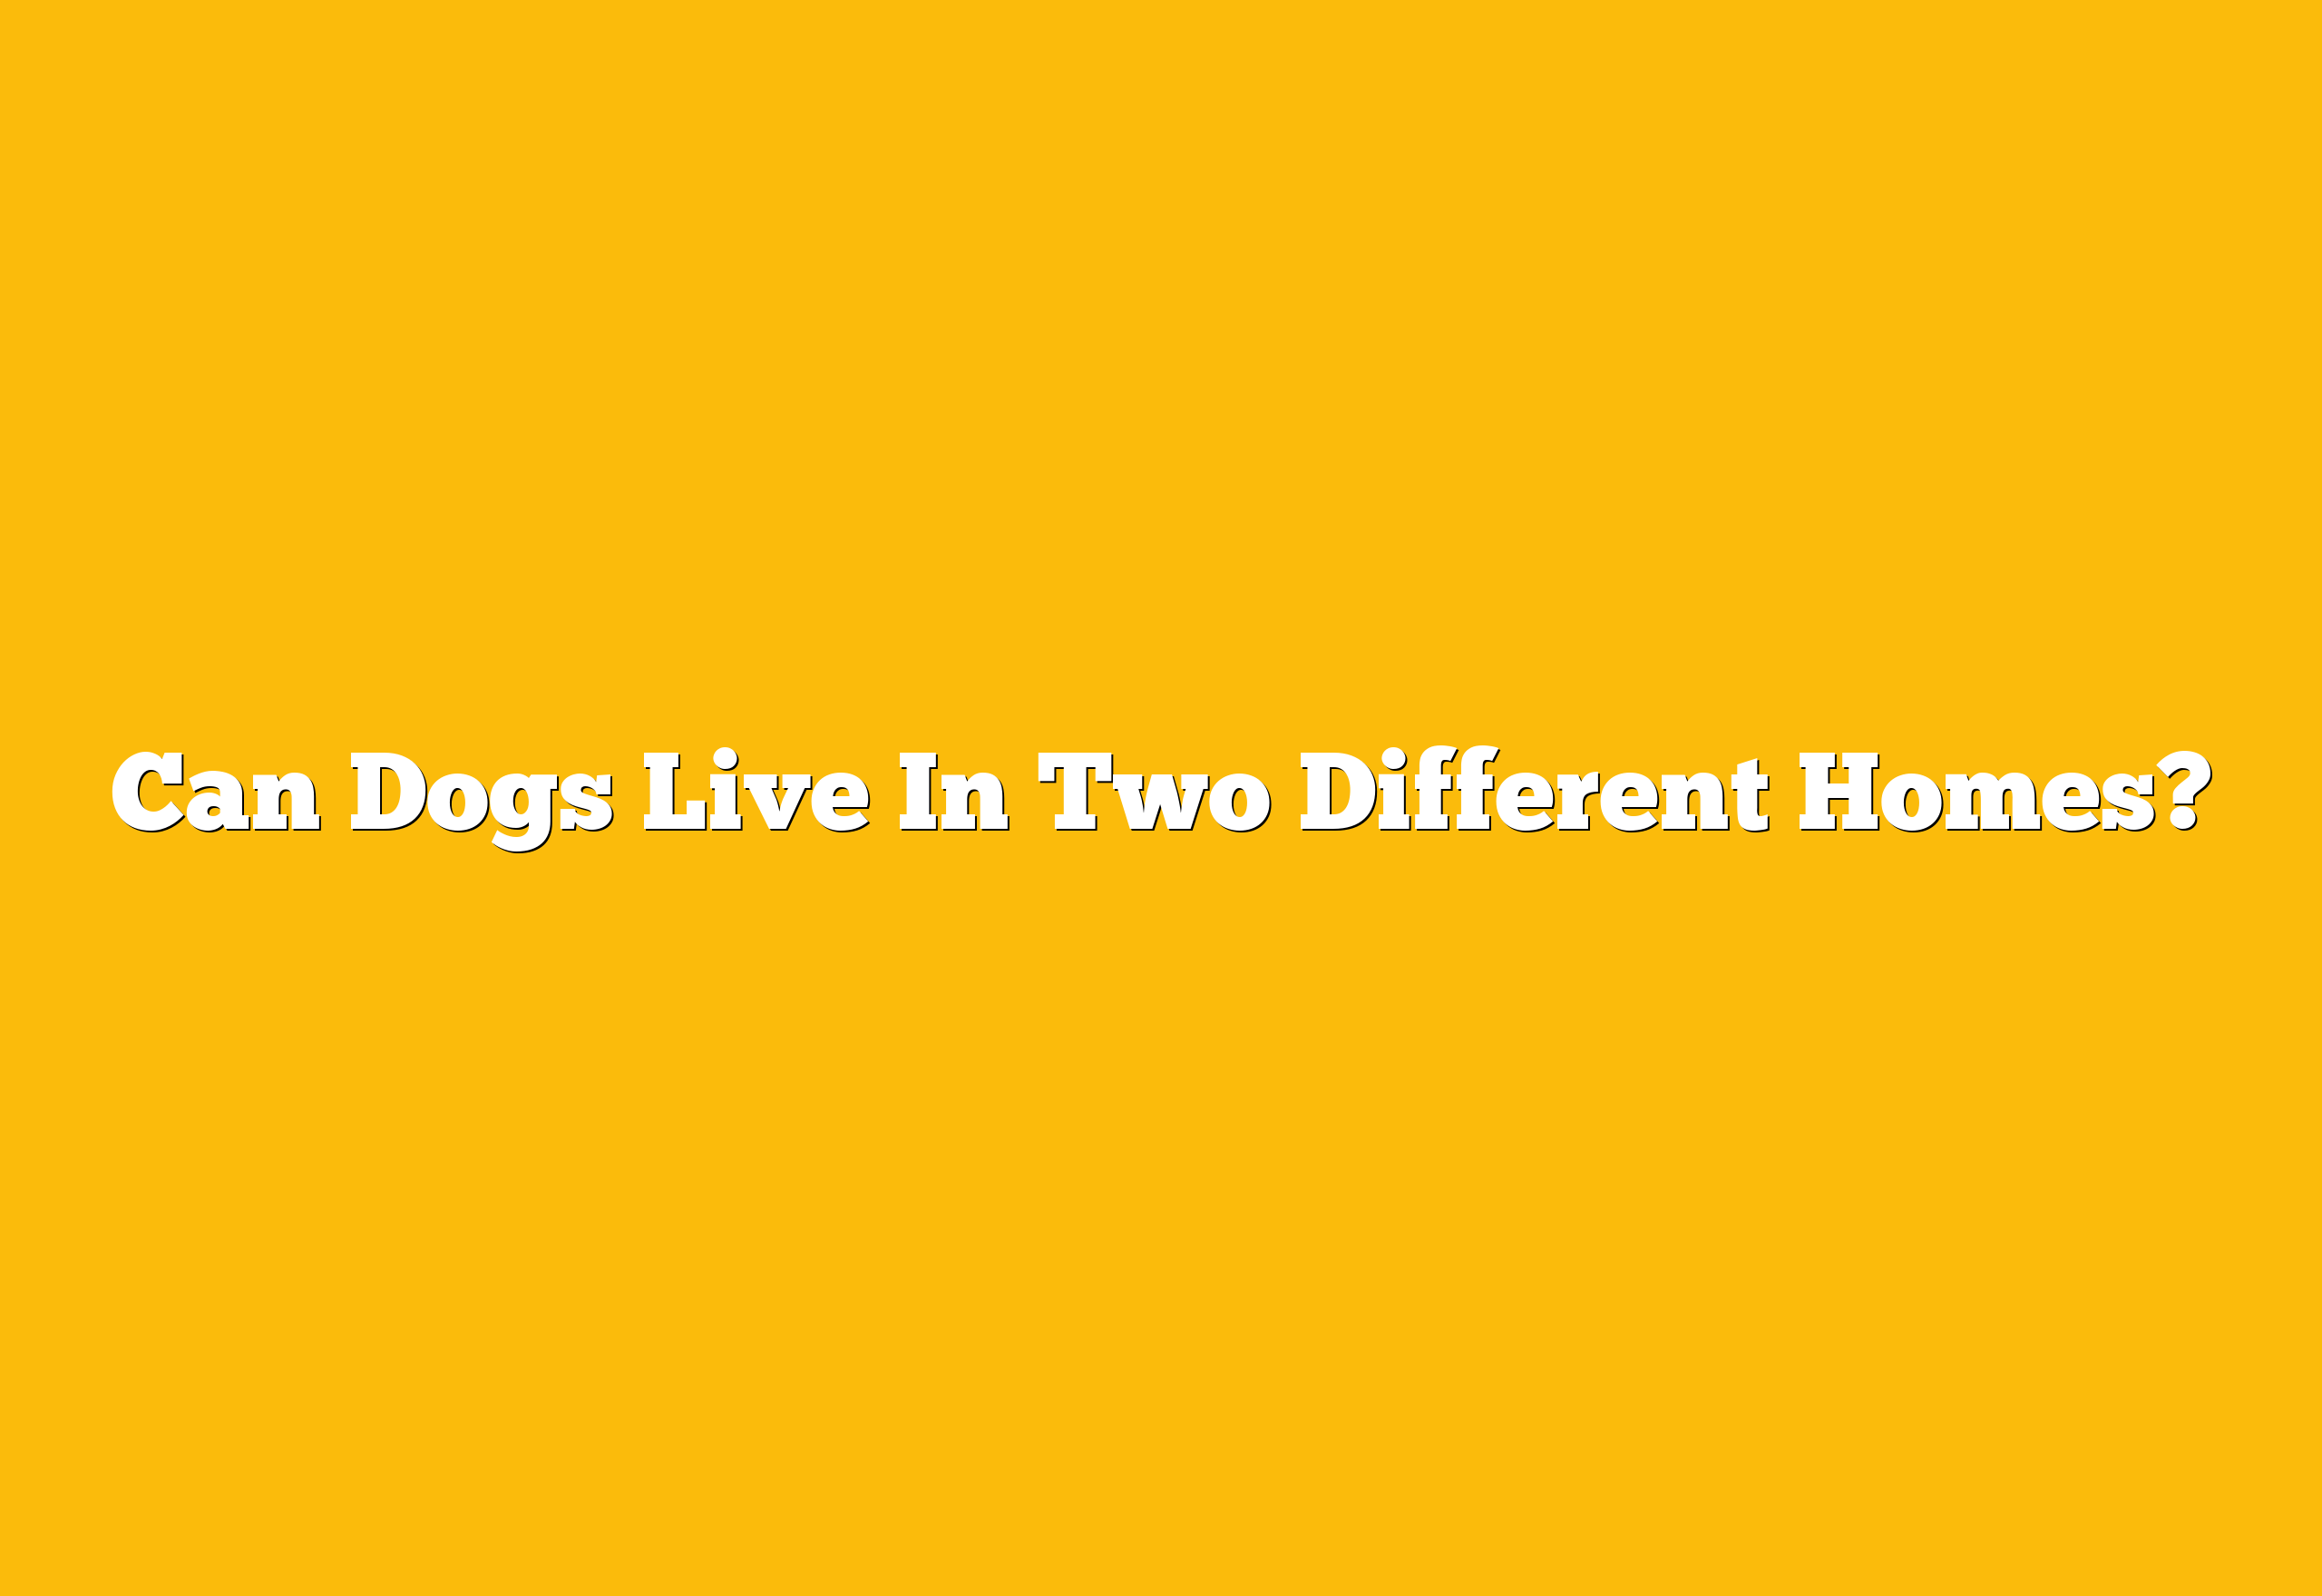 Can Dogs Live In Two Different Homes?